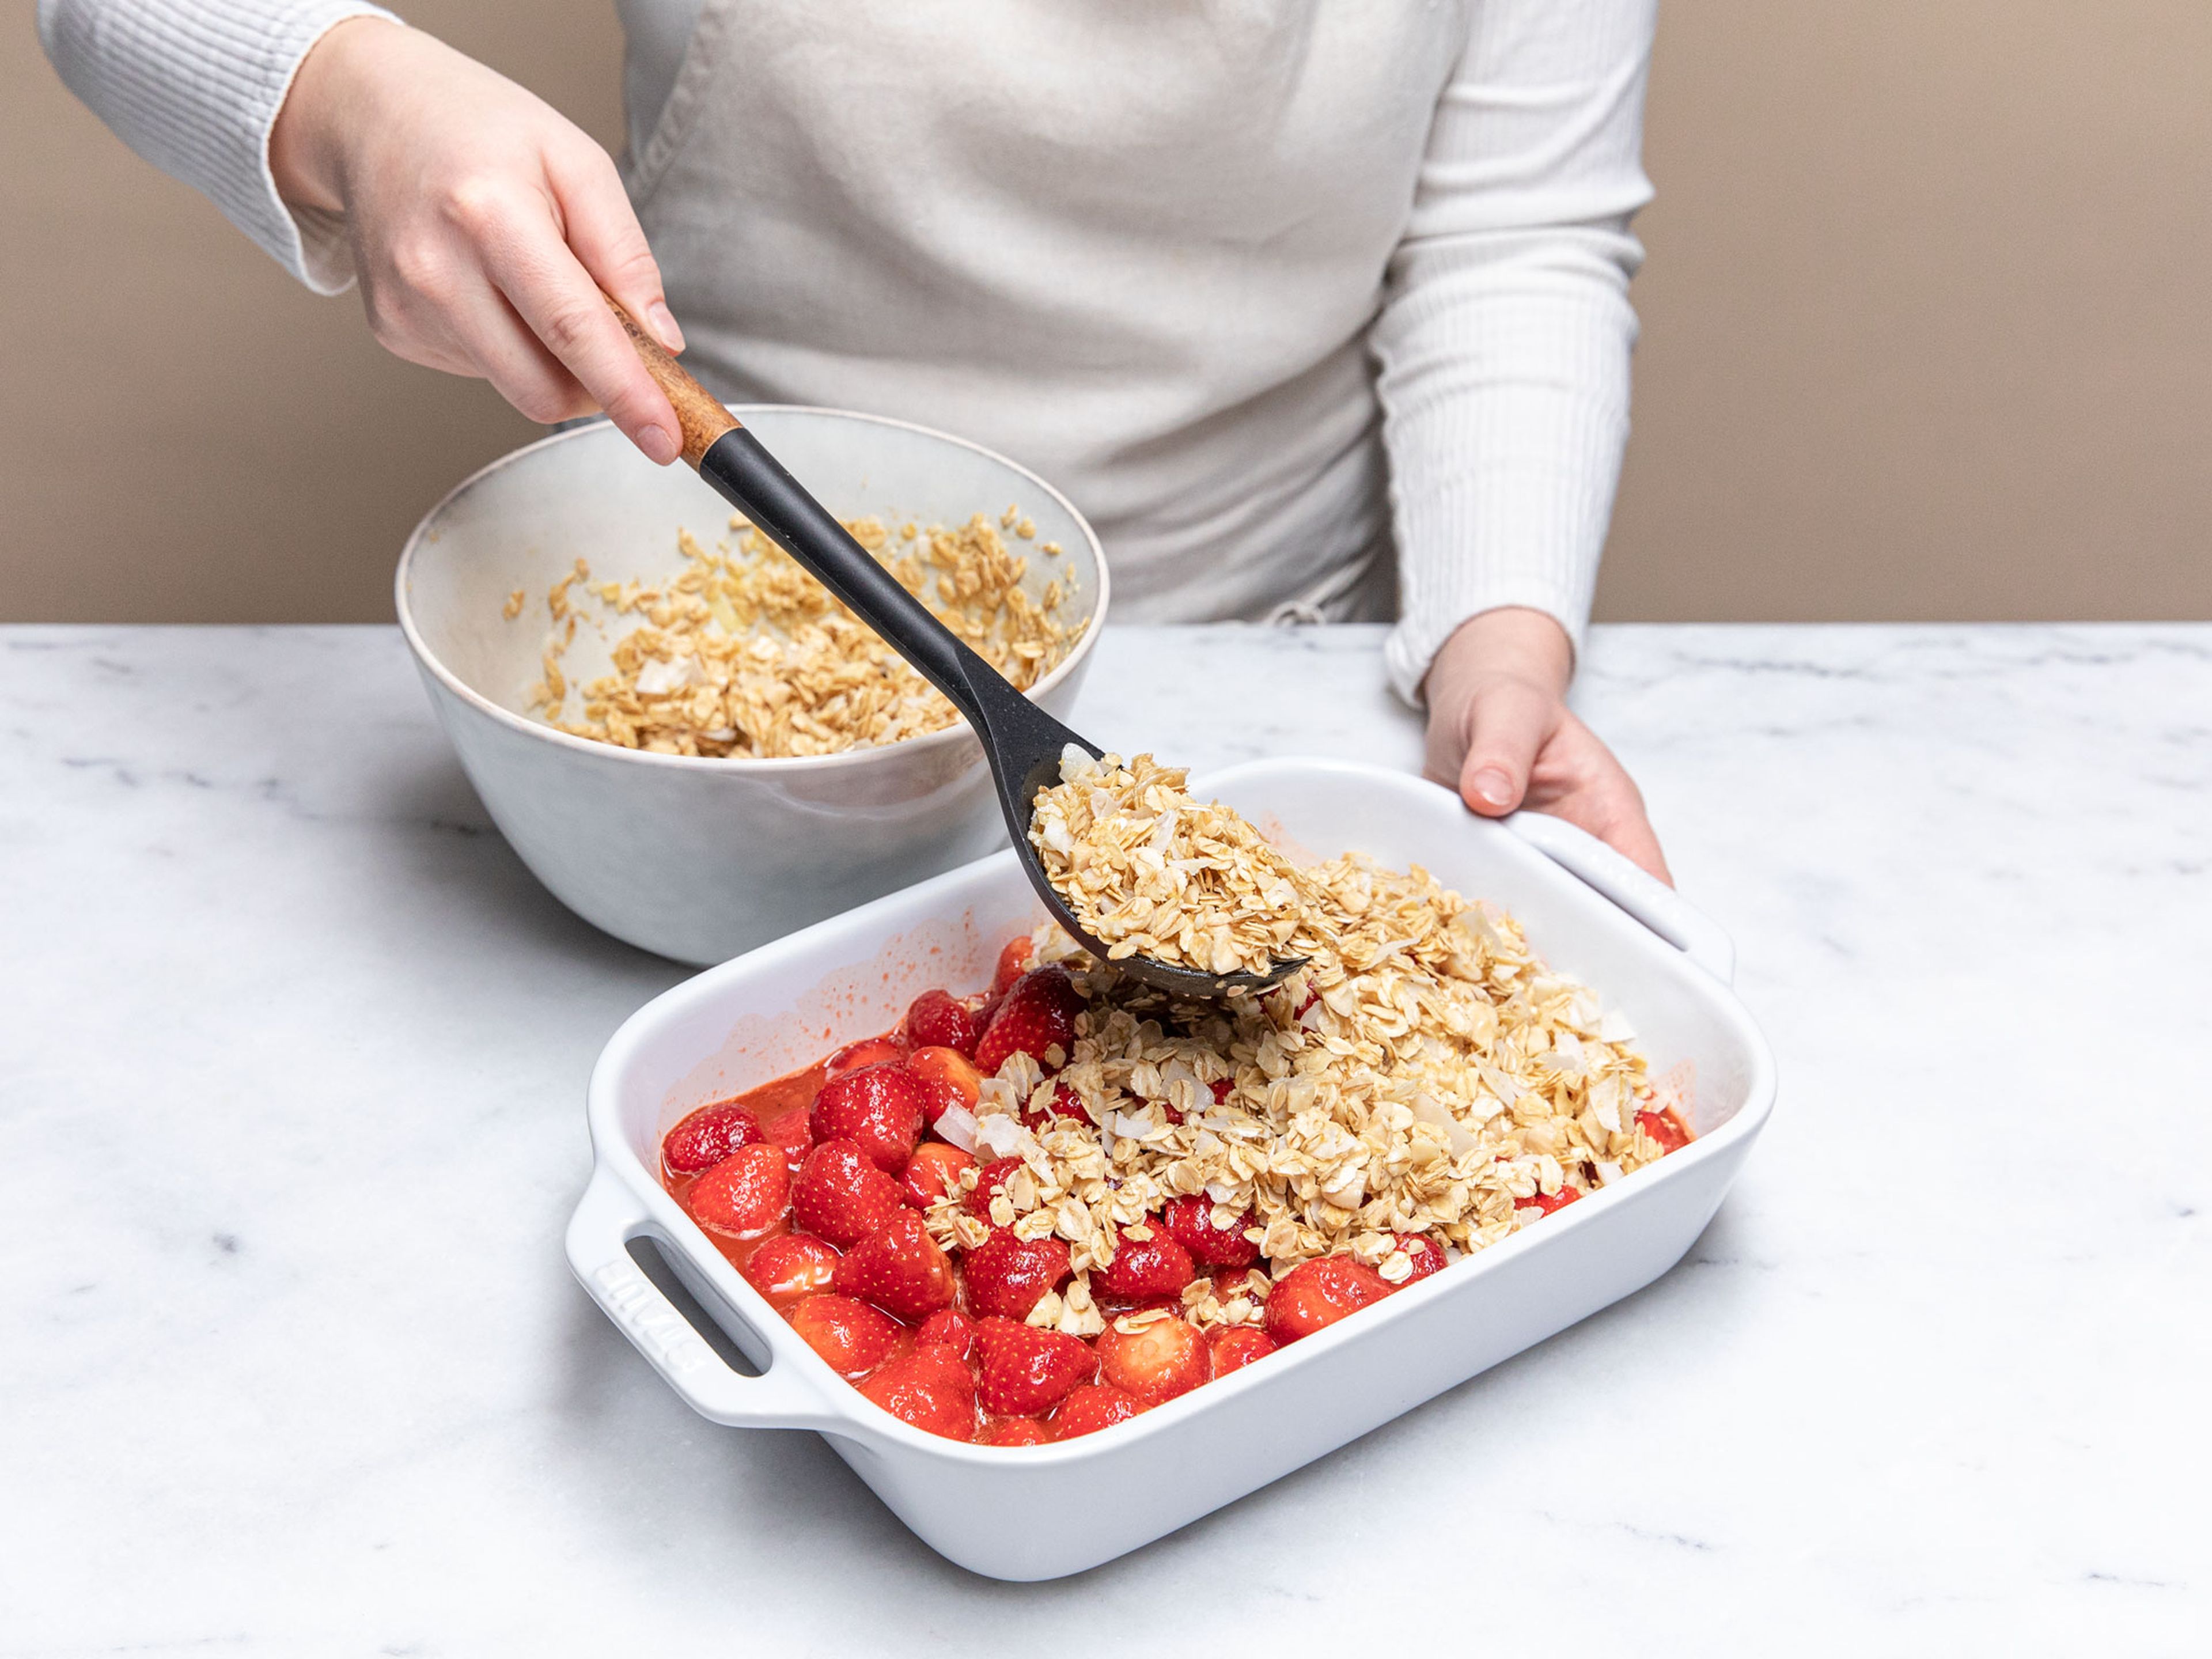 Place strawberries in a baking dish. Spread granola mixture over strawberries and bake at 180°C/ 356°F for approx. 30-40 min, or until the granola is golden brown and the corners are bubbling.